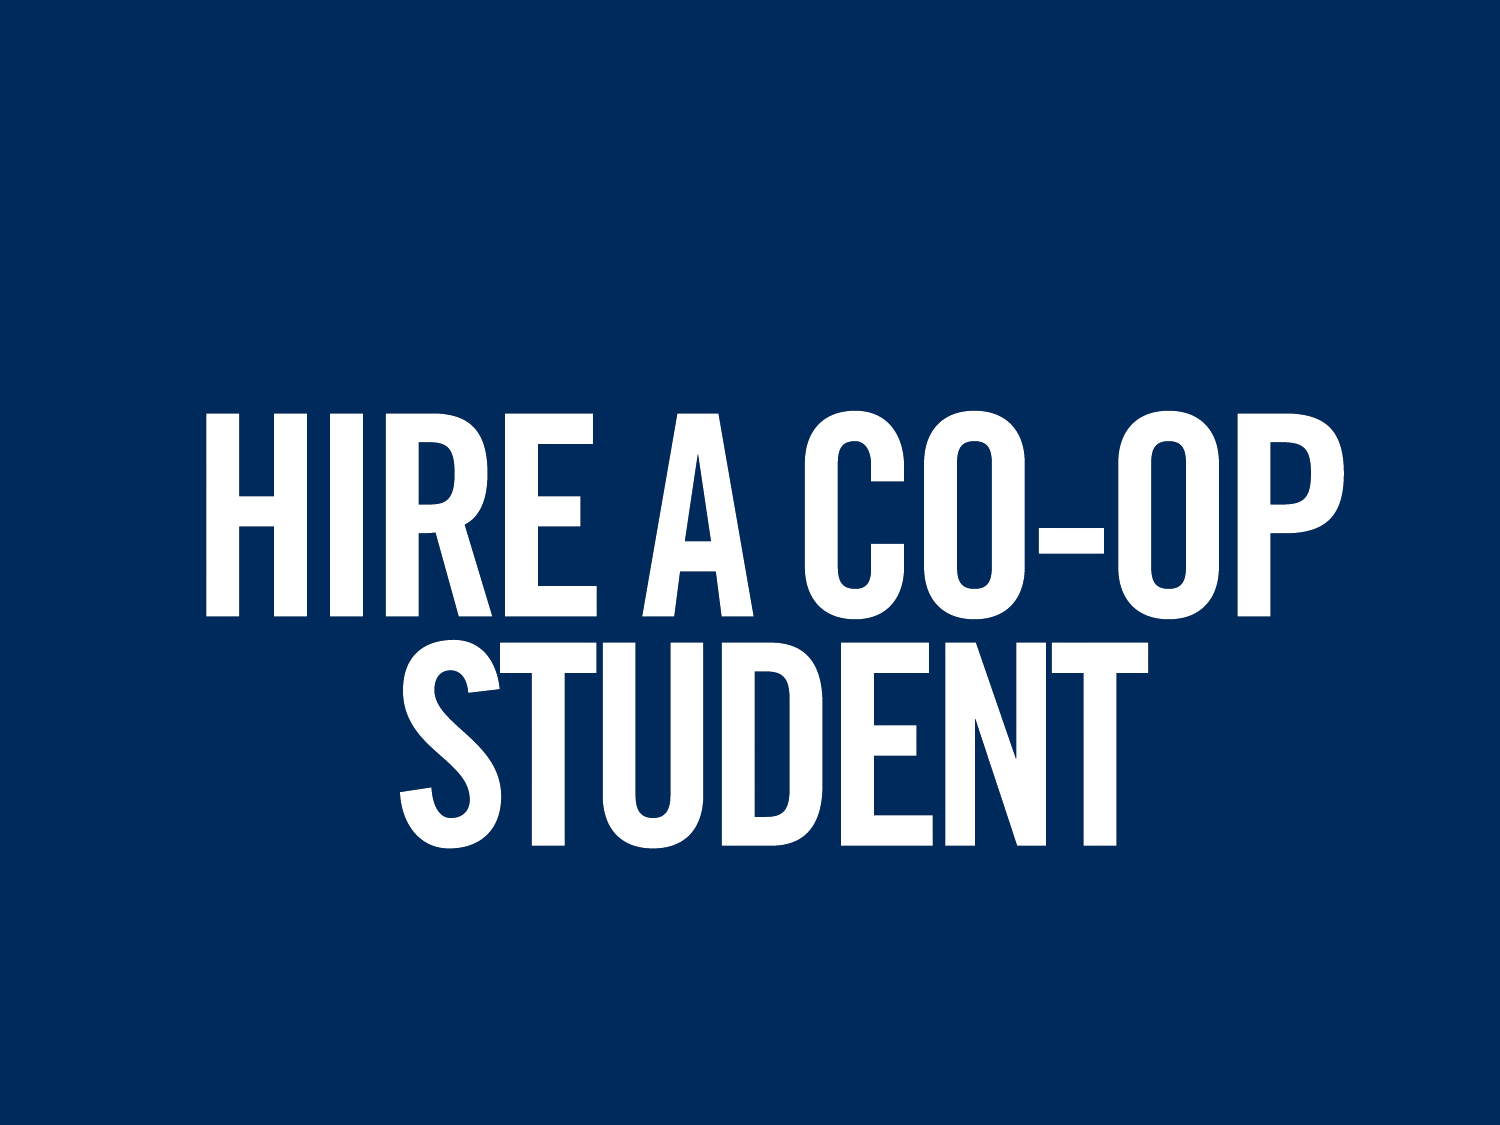 Co-op students available from over 35 programs in technology, arts, and the sciences.